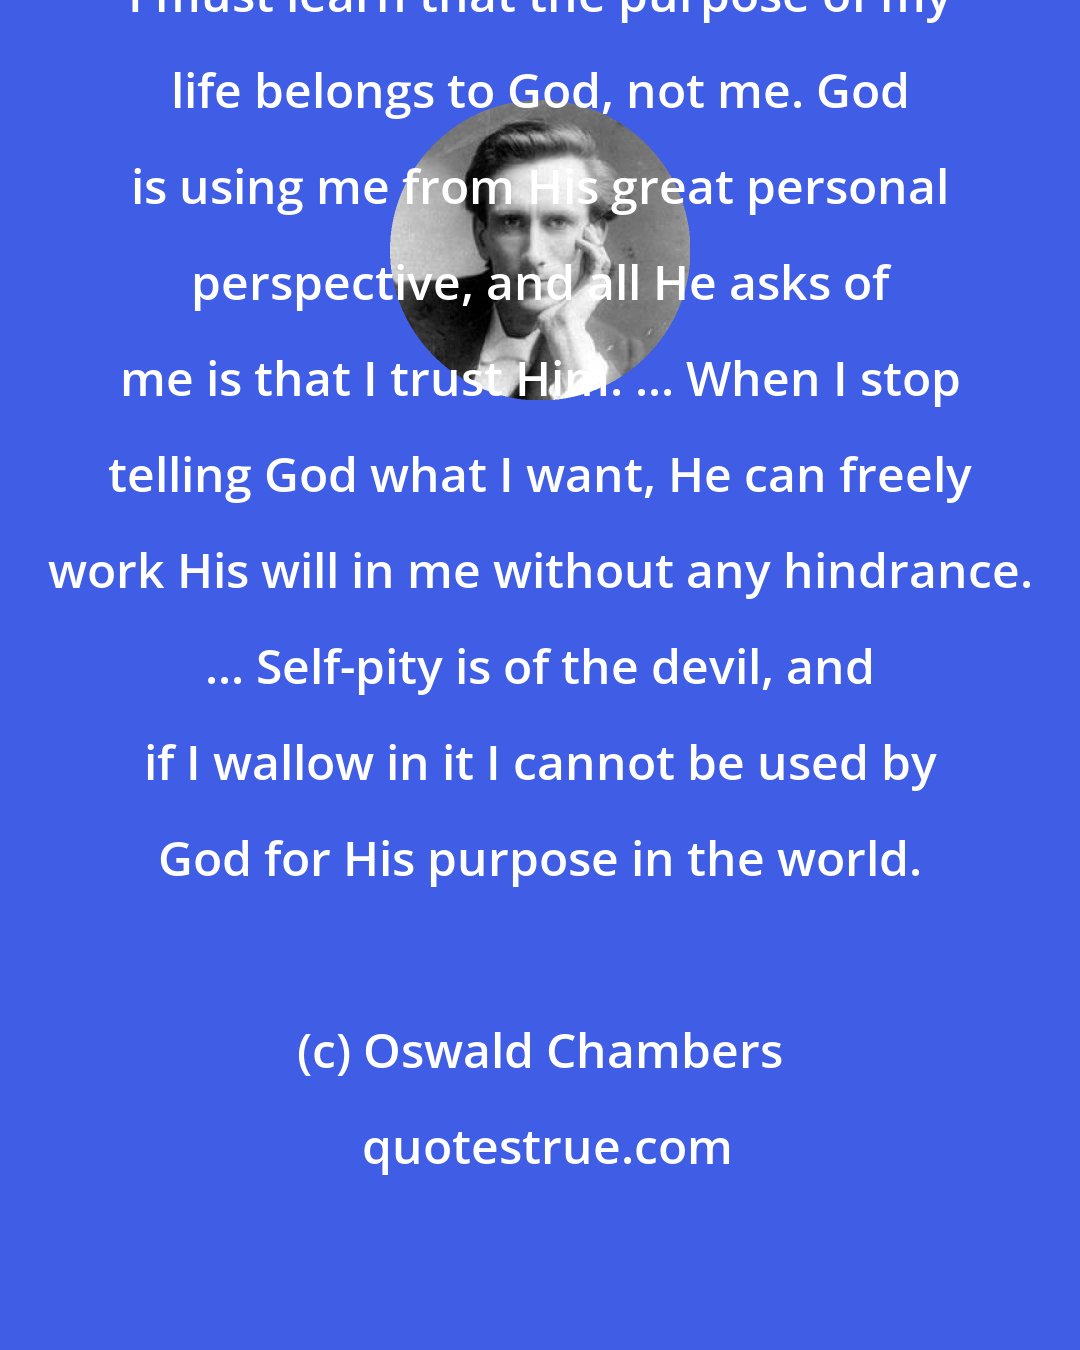 Oswald Chambers: I must learn that the purpose of my life belongs to God, not me. God is using me from His great personal perspective, and all He asks of me is that I trust Him. ... When I stop telling God what I want, He can freely work His will in me without any hindrance. ... Self-pity is of the devil, and if I wallow in it I cannot be used by God for His purpose in the world.